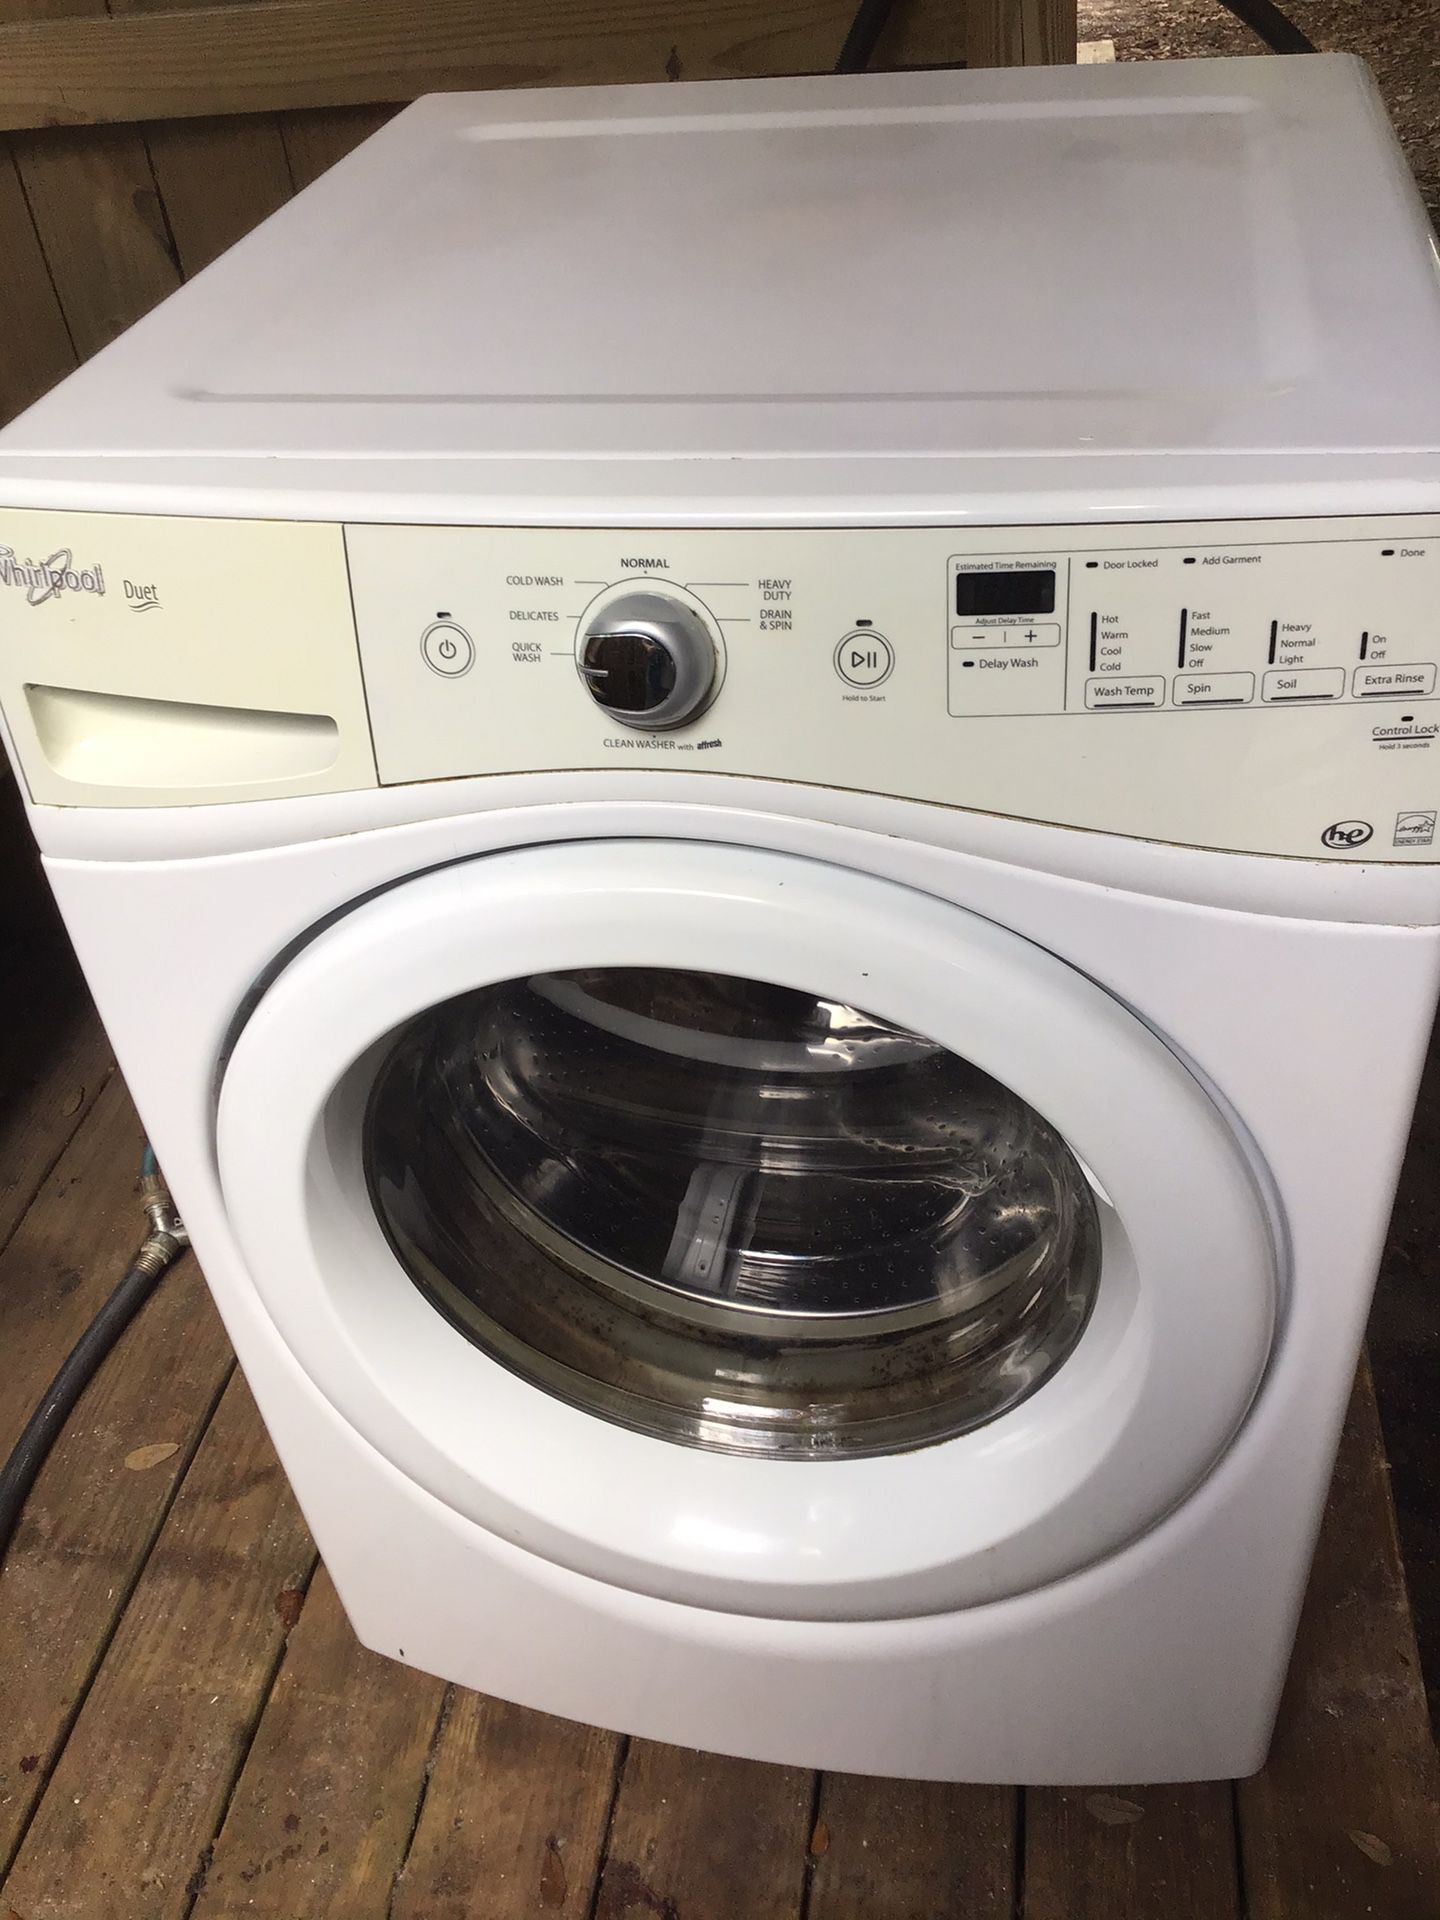 Whirlpool duet front load washer washing machine stackable